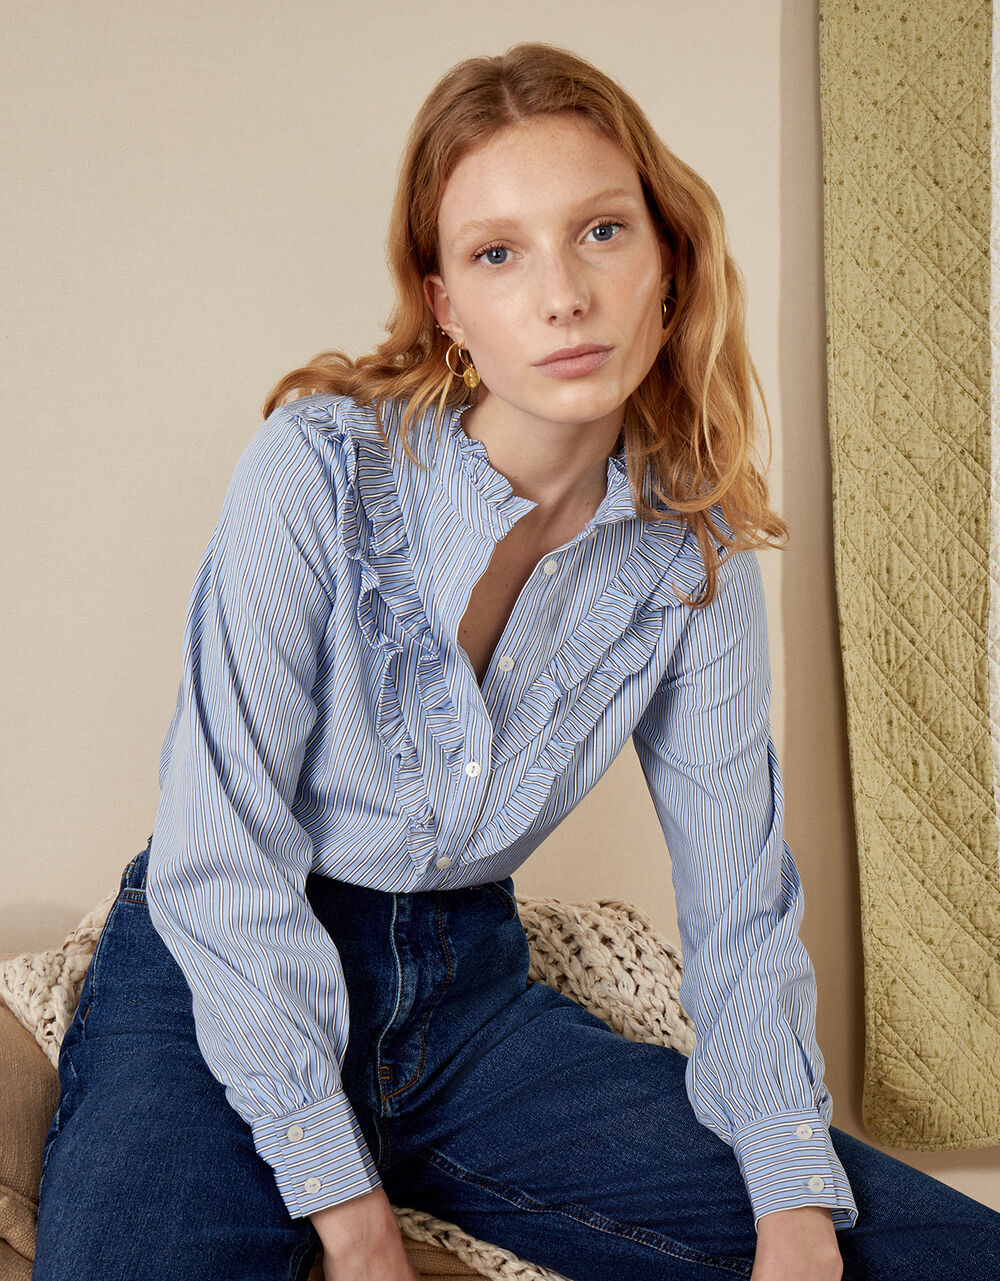 Women Women's Clothing | Stripe Frill Print Shirt in Recycled Polyester Blue - ZU41542